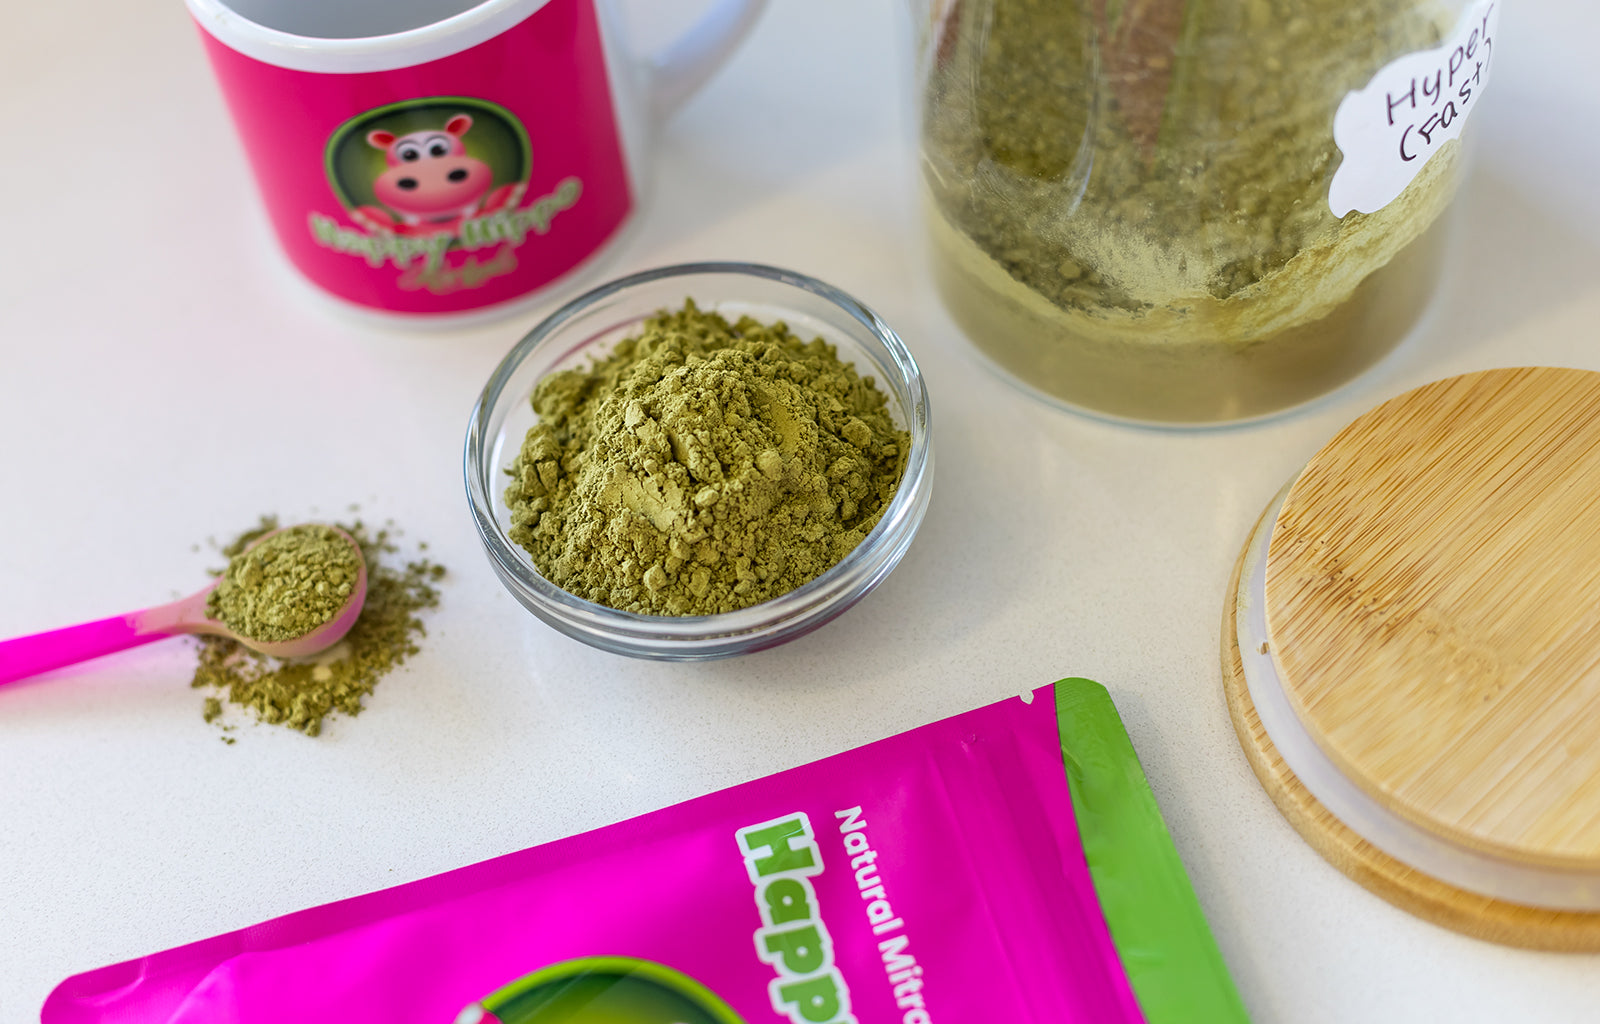 Featured image depicting an assortment of Happy Hippo brand Green Maeng Da Kratom Powder, next to which sit a small ramekin containing a heap of Green Vein Maeng Da, and a Happy Hippo branded coffee cup.